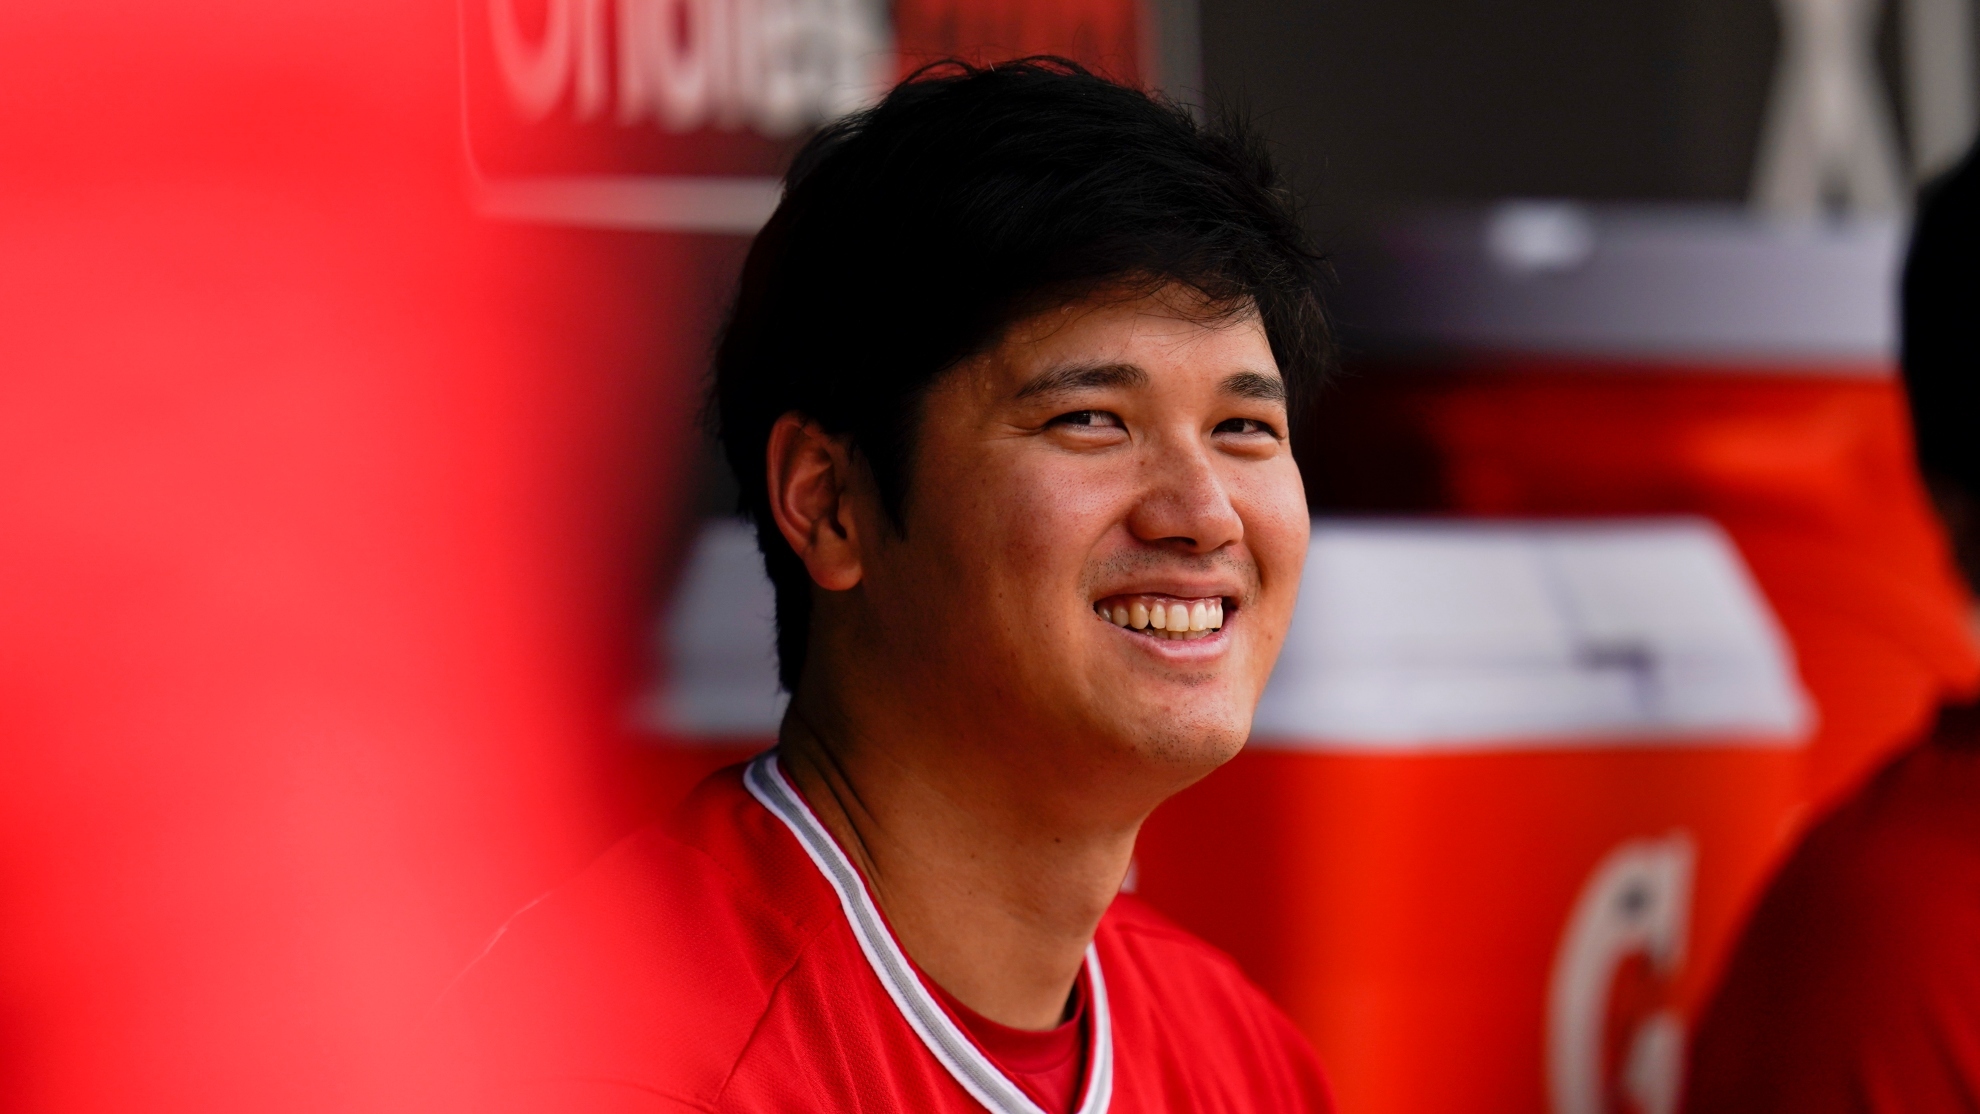 Dodgers All-Star Max Muncy tries to recruit Shohei Ohtani by sending a clear message